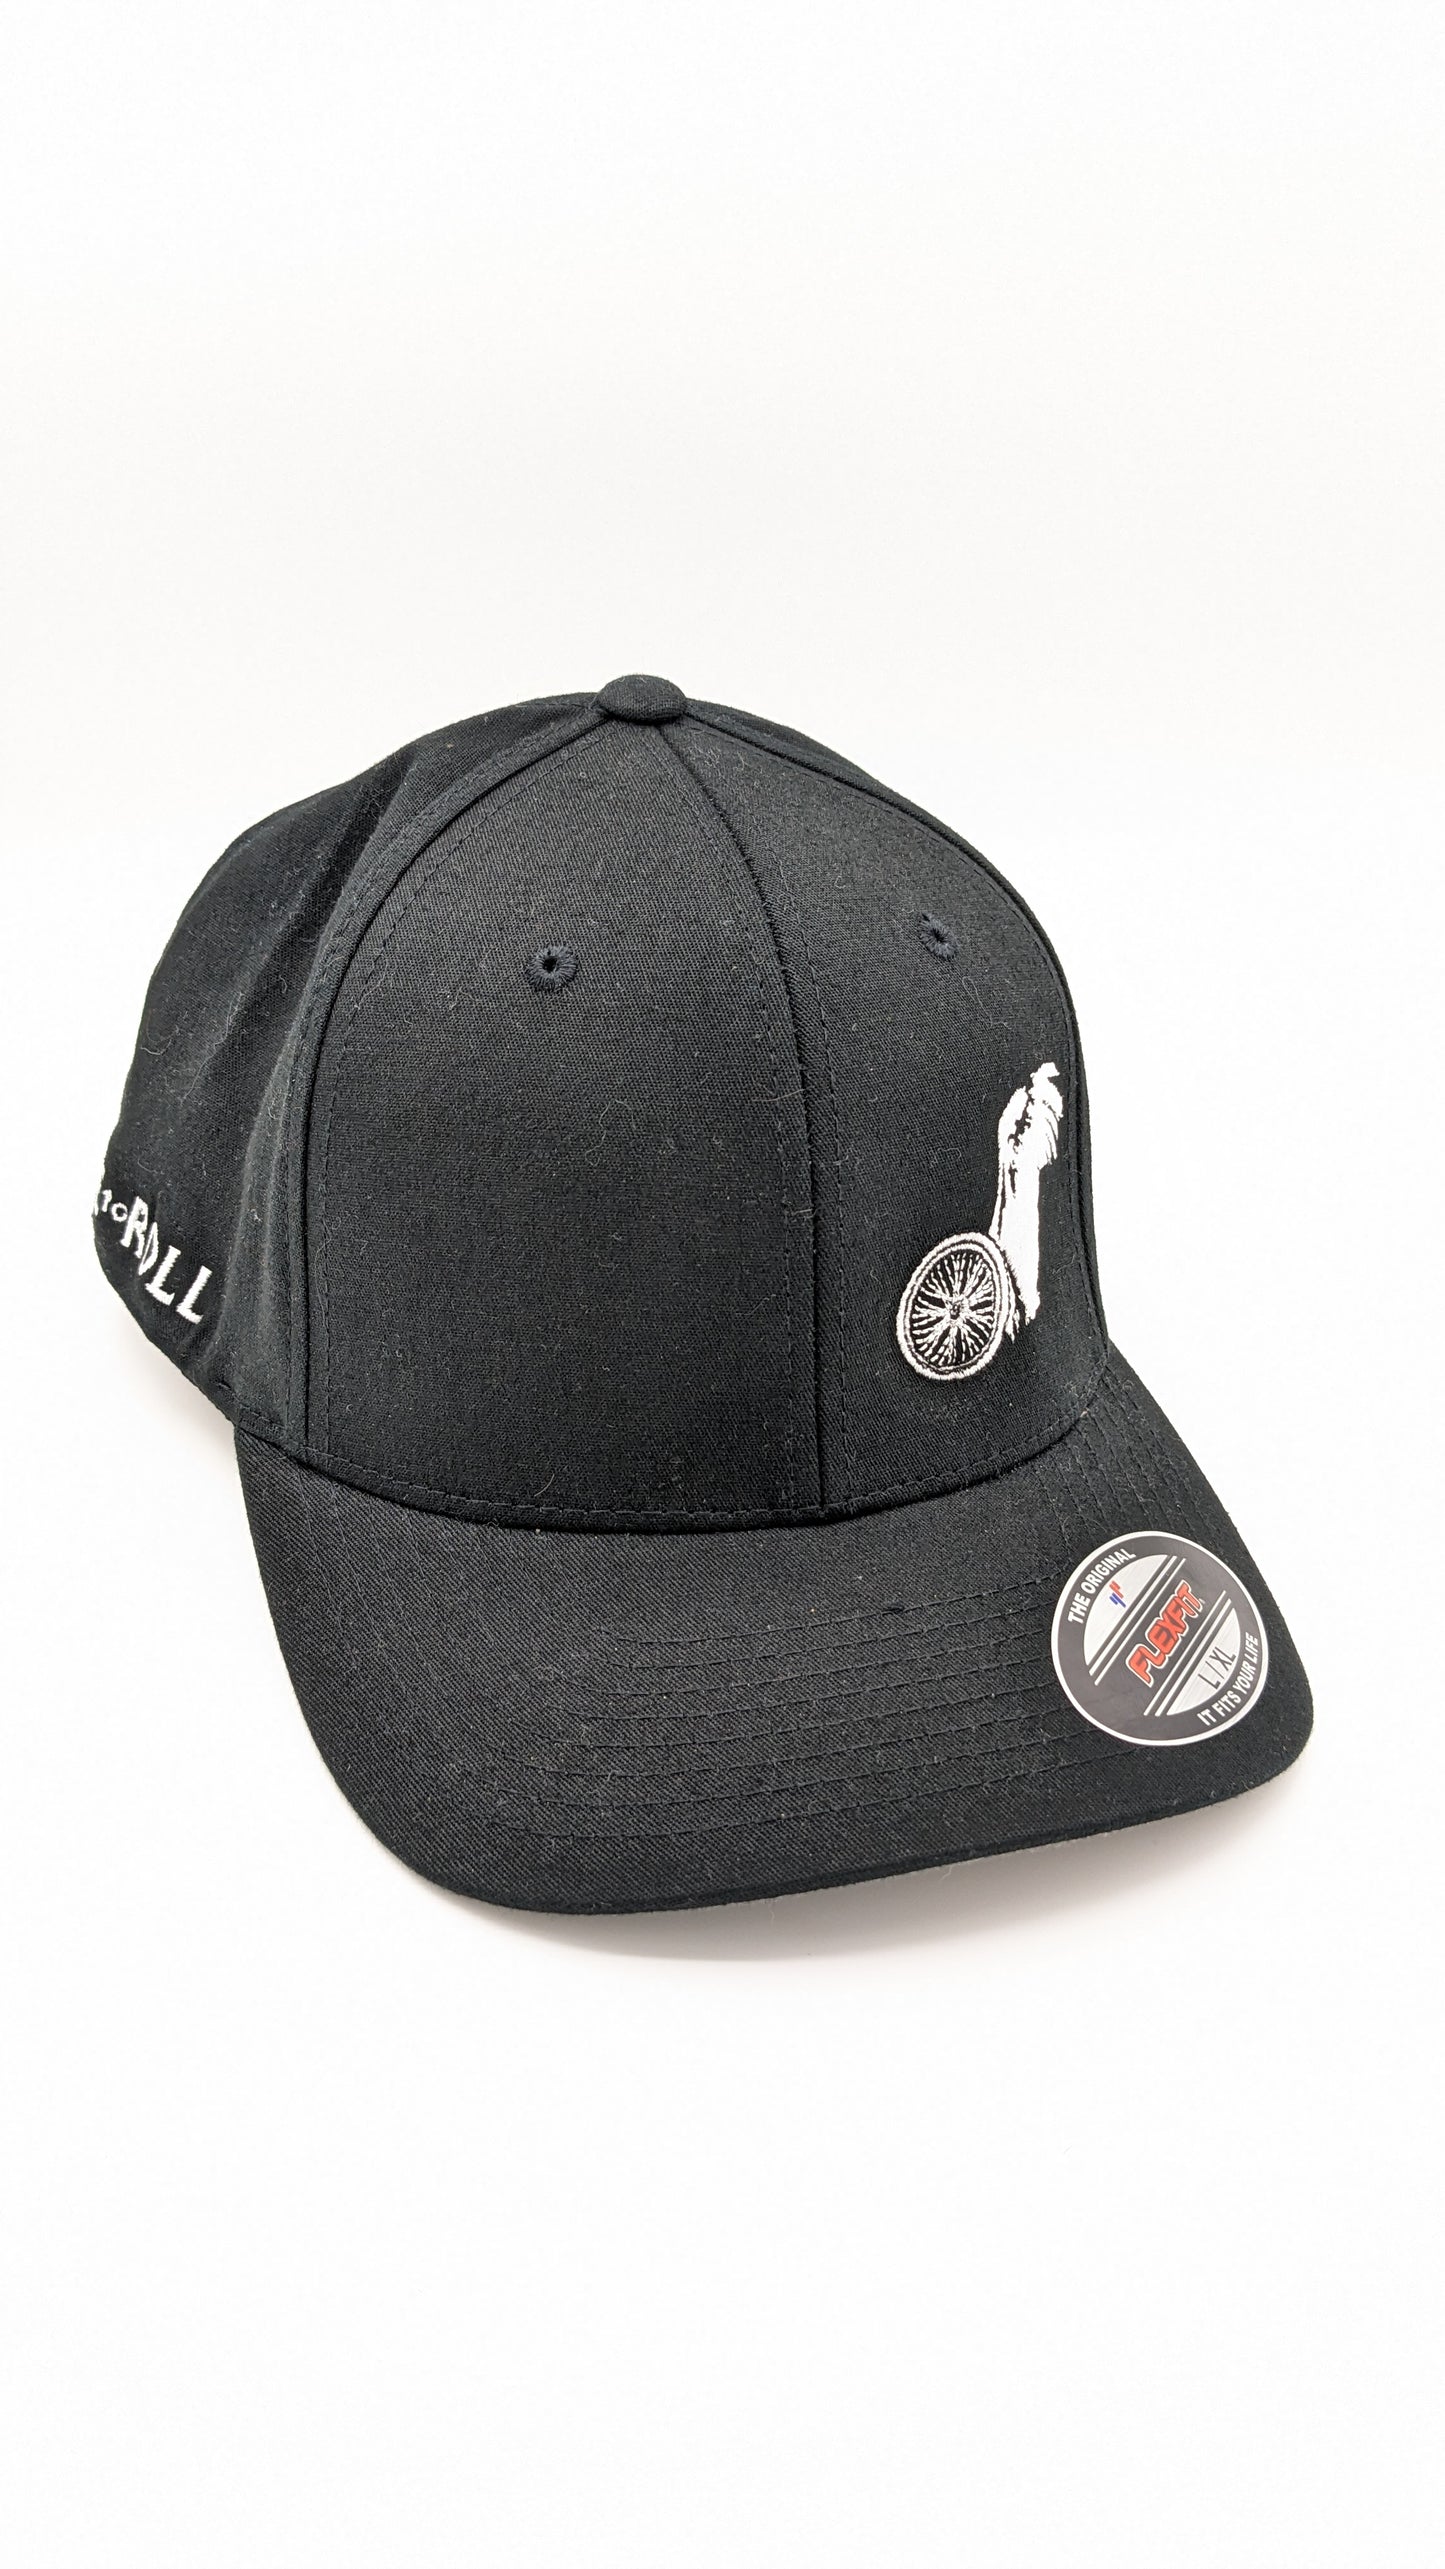 Live To Roll - Wheel Wing Logo Hats